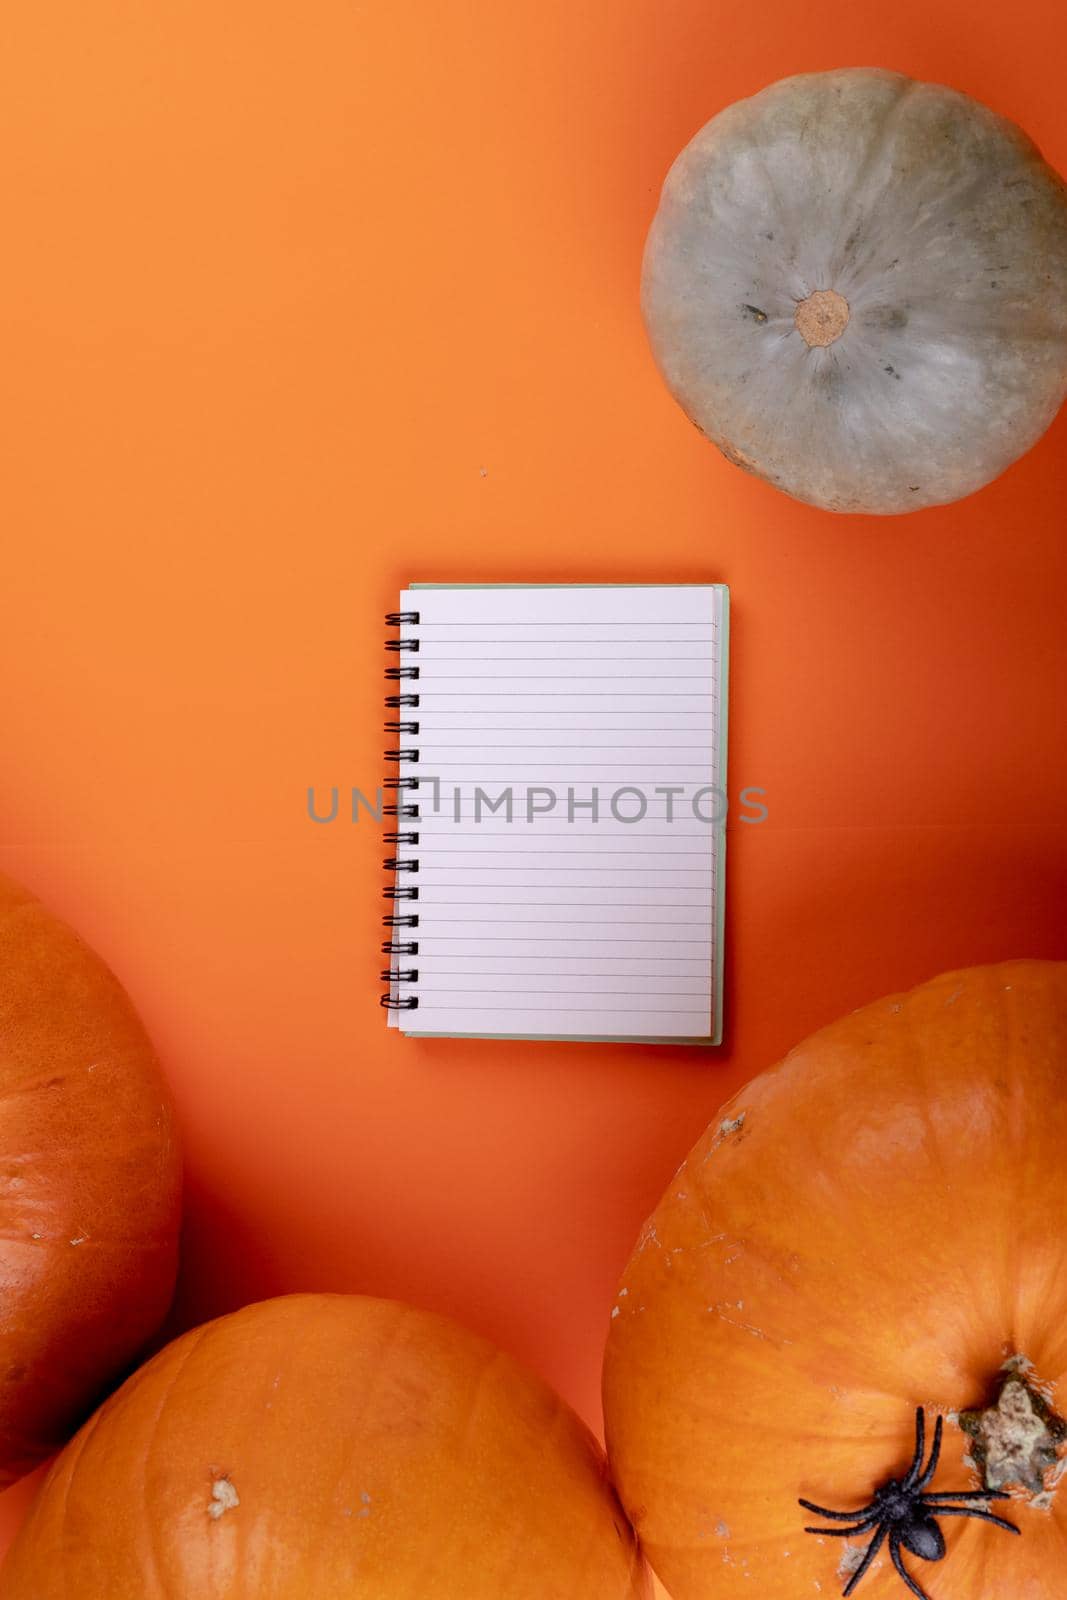 Composition of halloween decoration with pumpkins and notebook with copy space on orange background. horror, fright, halloween tradition and celebration concept digitally generated image.